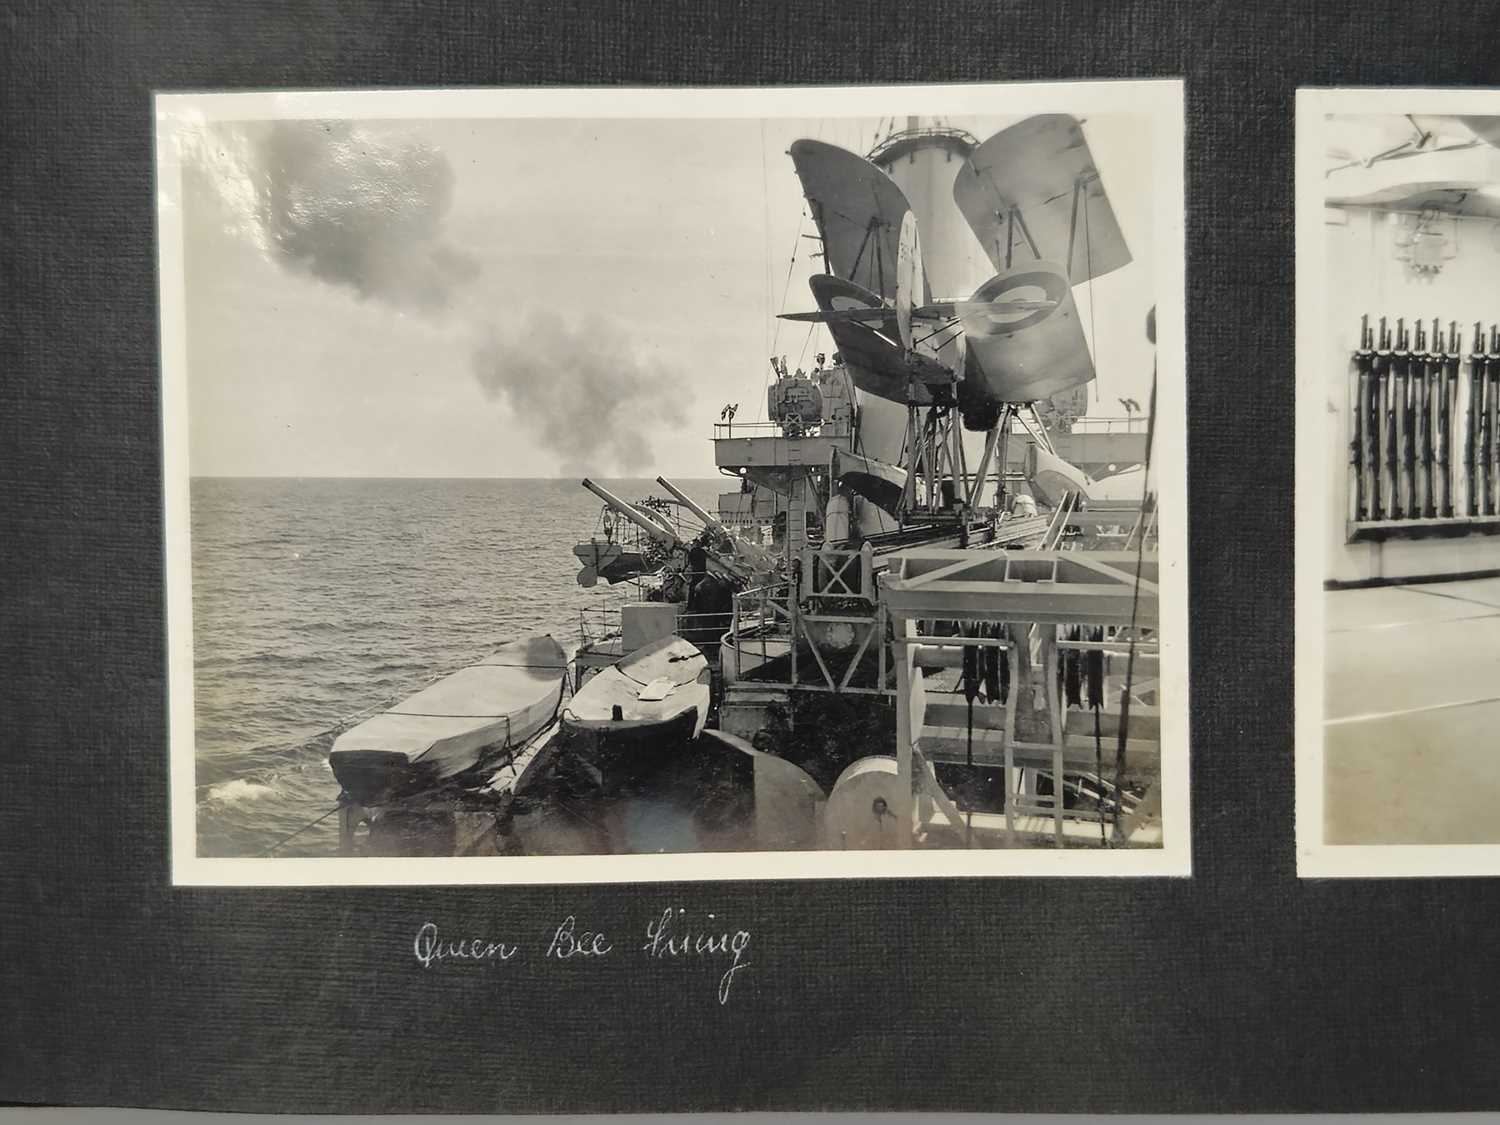 Royal Navy Photograph album of the maiden voyage of HMS Ajax (1935-1937) - Image 14 of 22